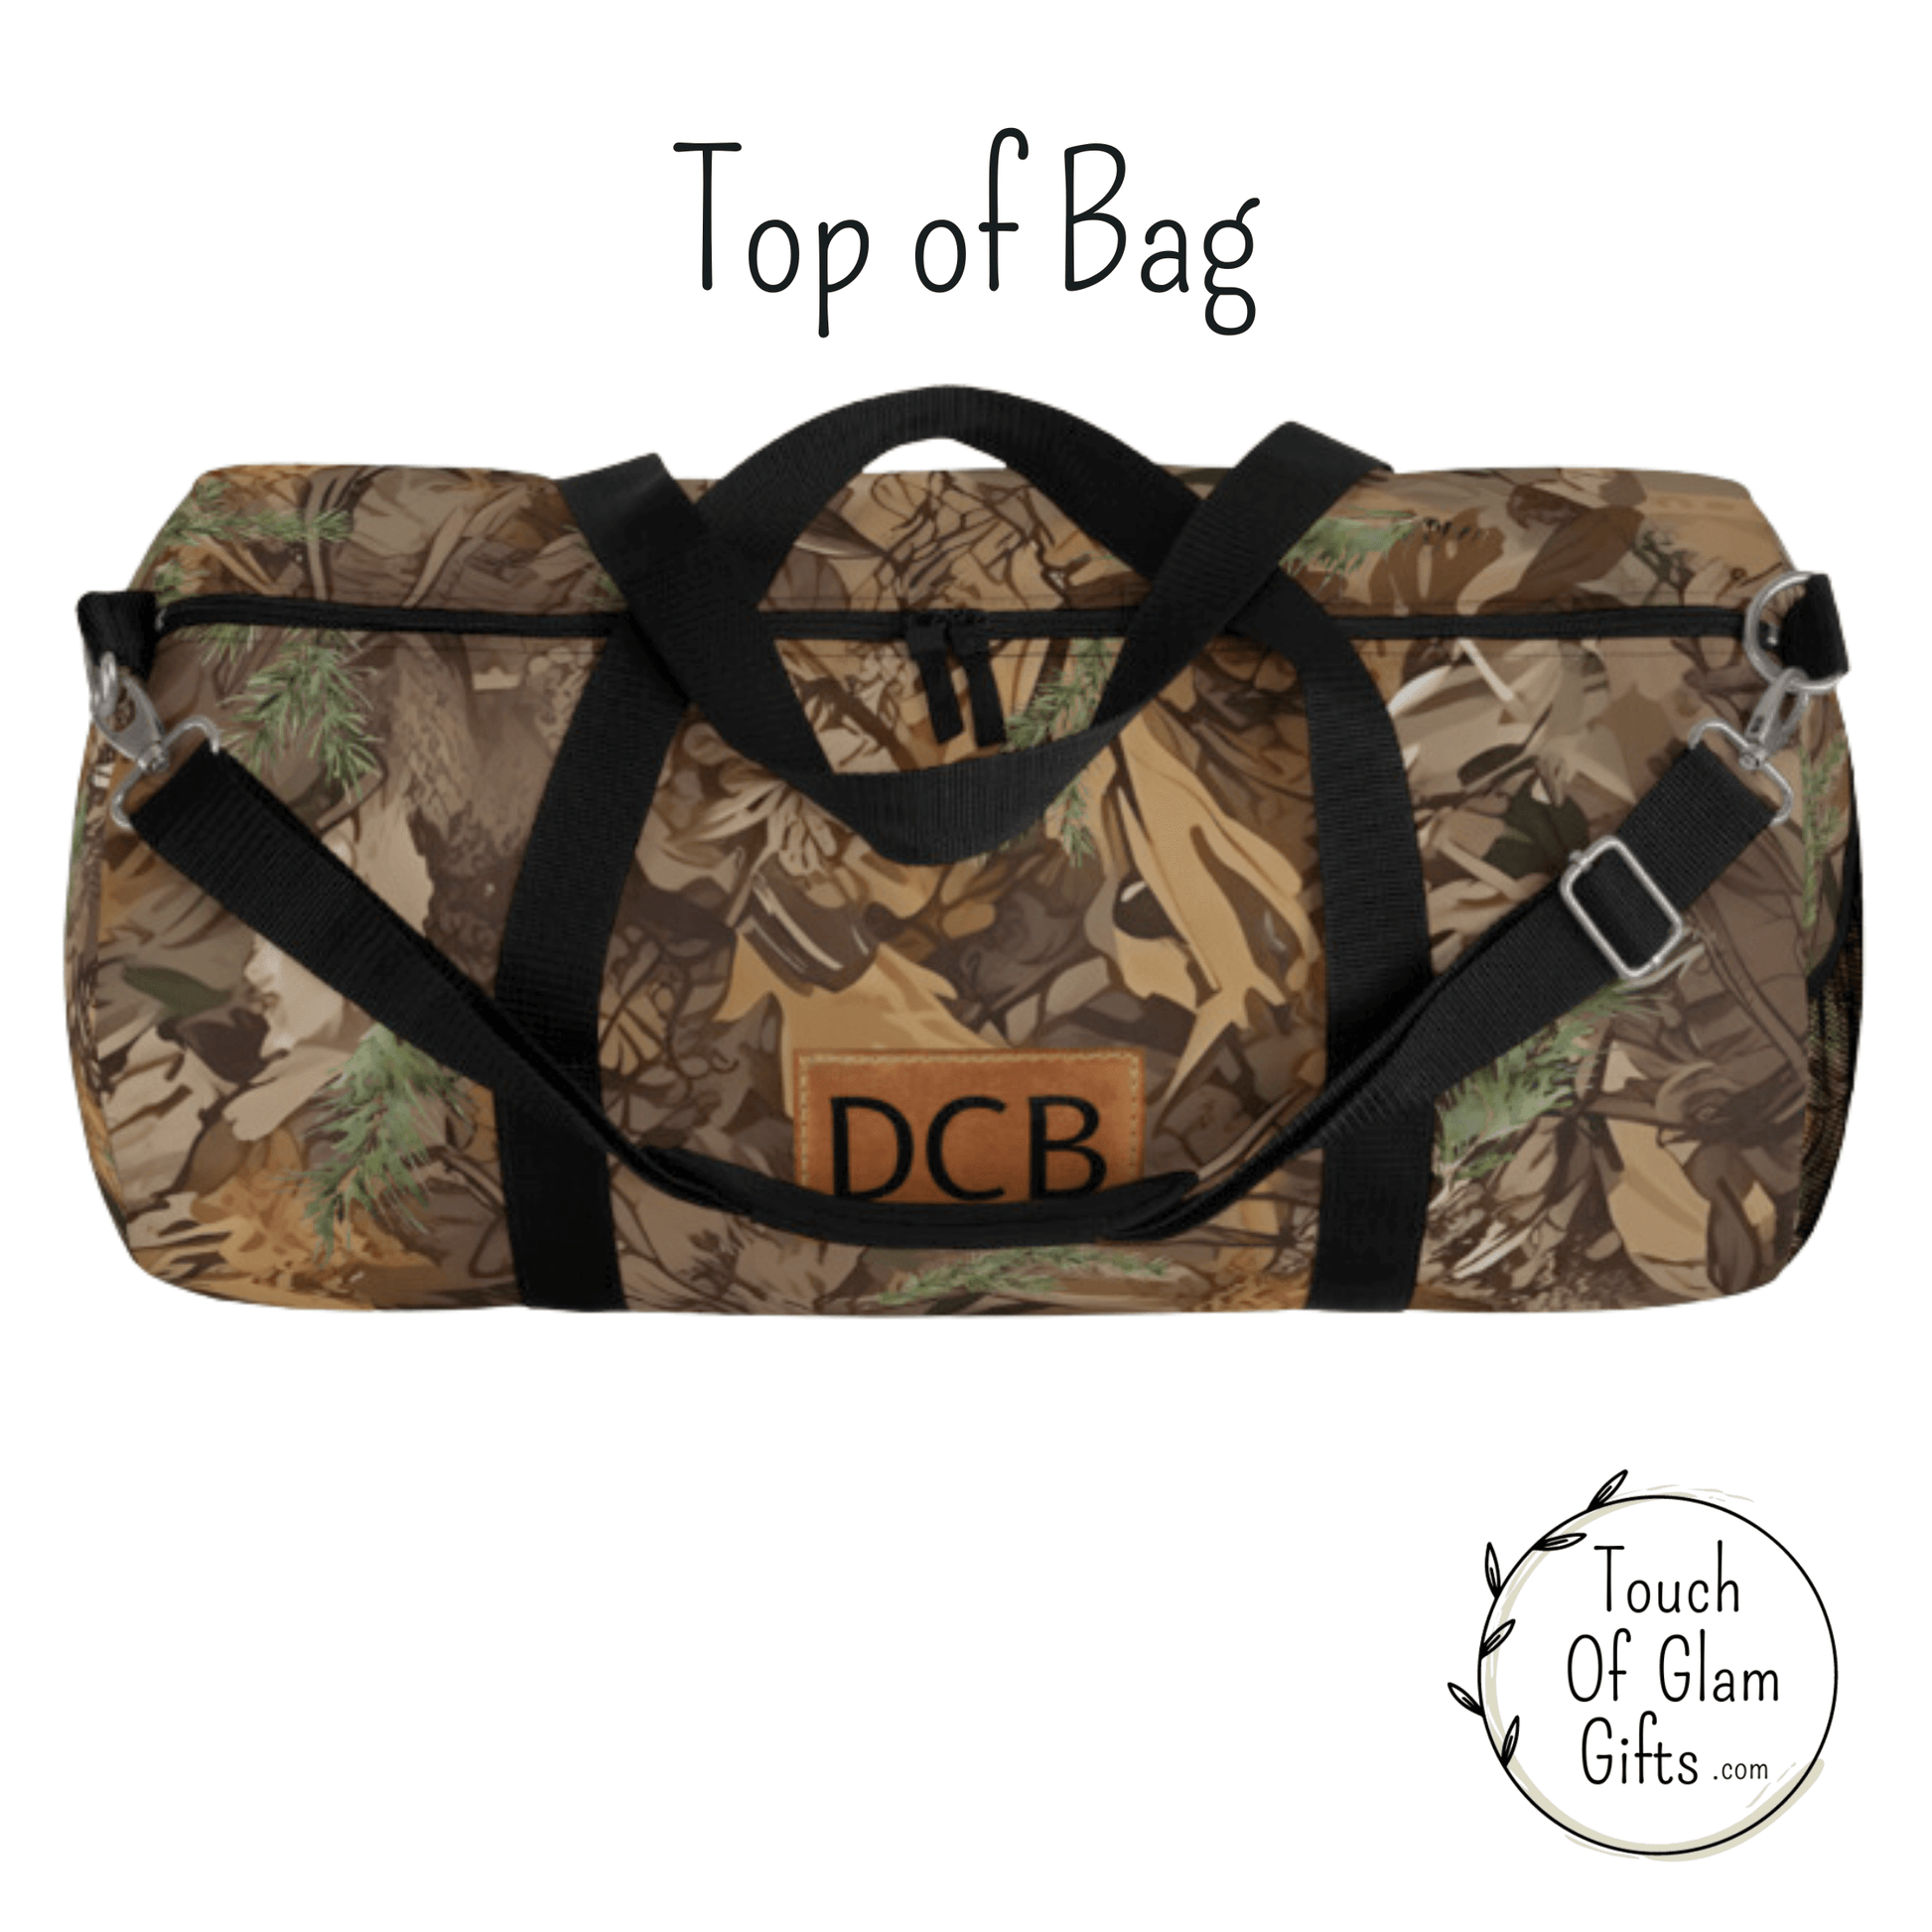 The top of the duffel bag shows a zipper and handles and padded shoulder strap and the bag is the same in large or small size.